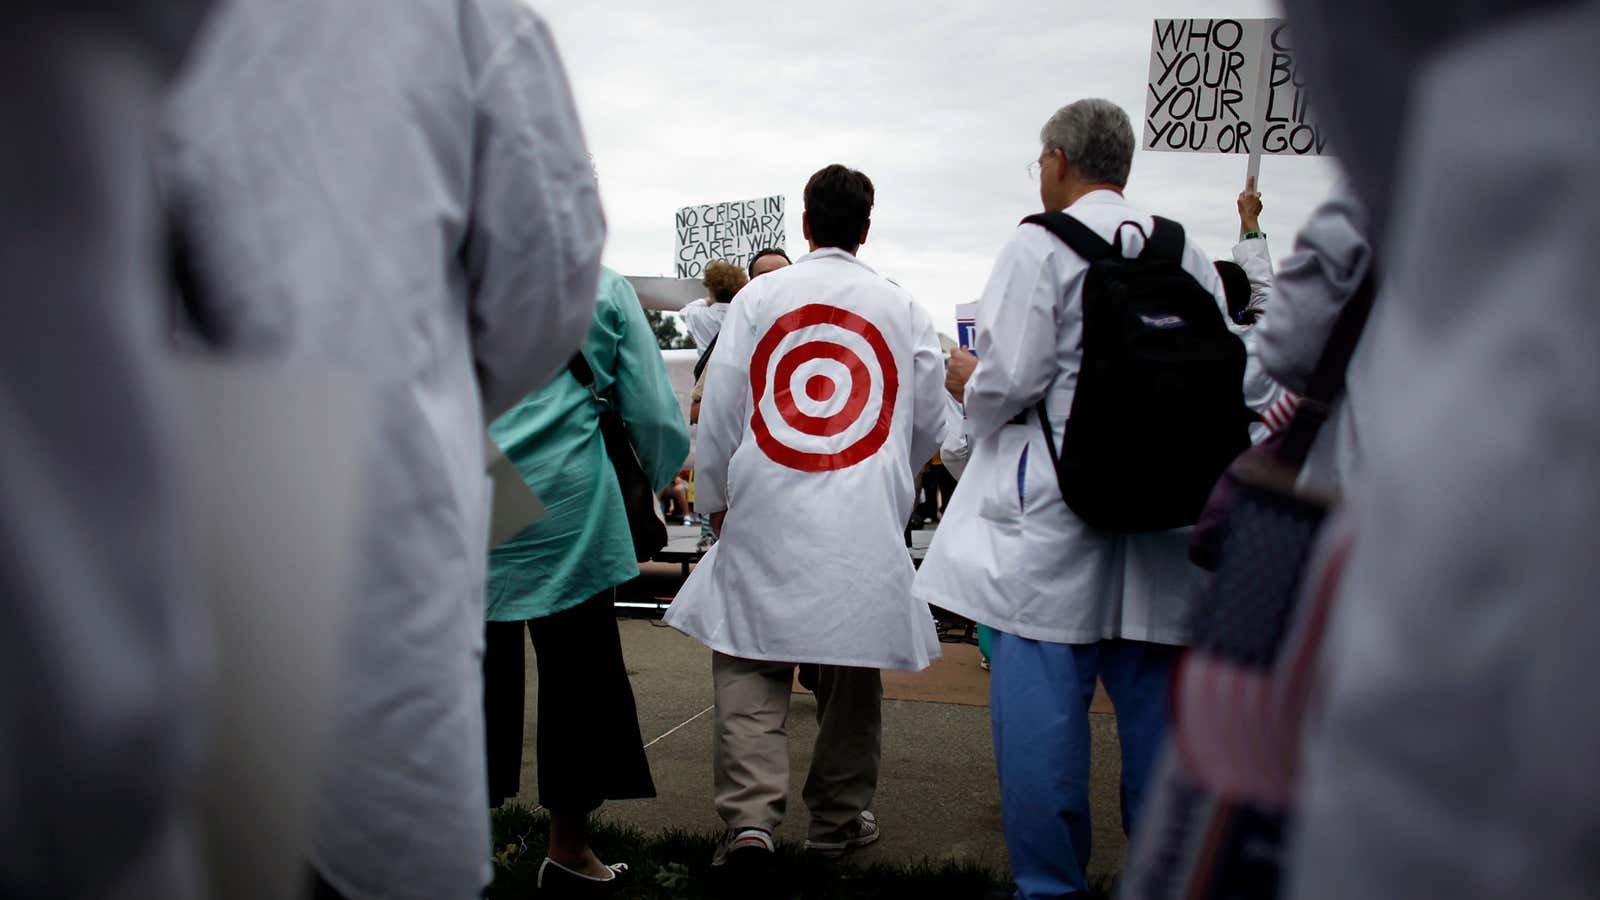 Among the targets doctors are dodging these days: Massive student debt, long hours, low pay, and lawsuits.